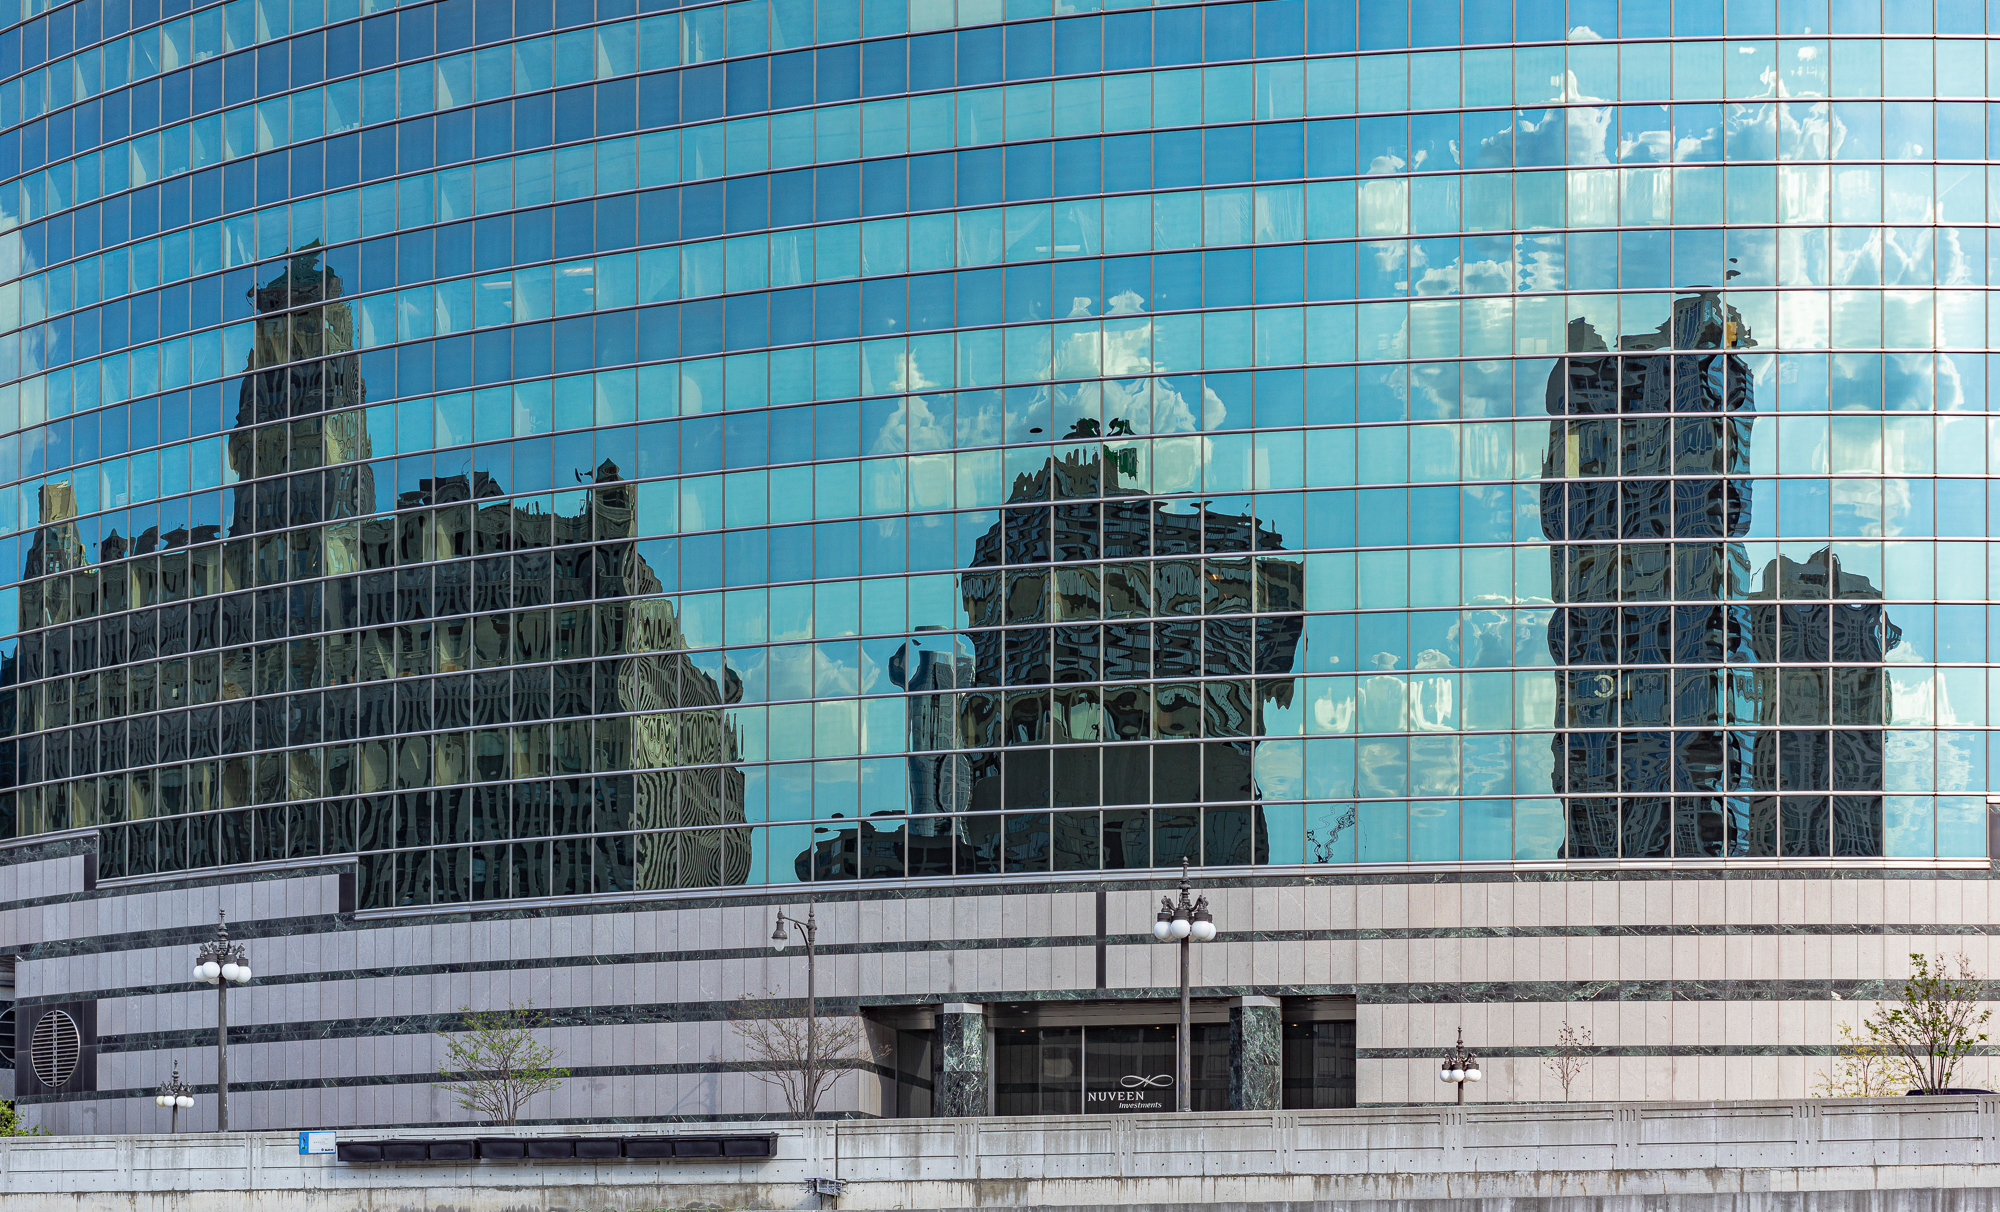 Glass windows distort reflections of nearby buildings